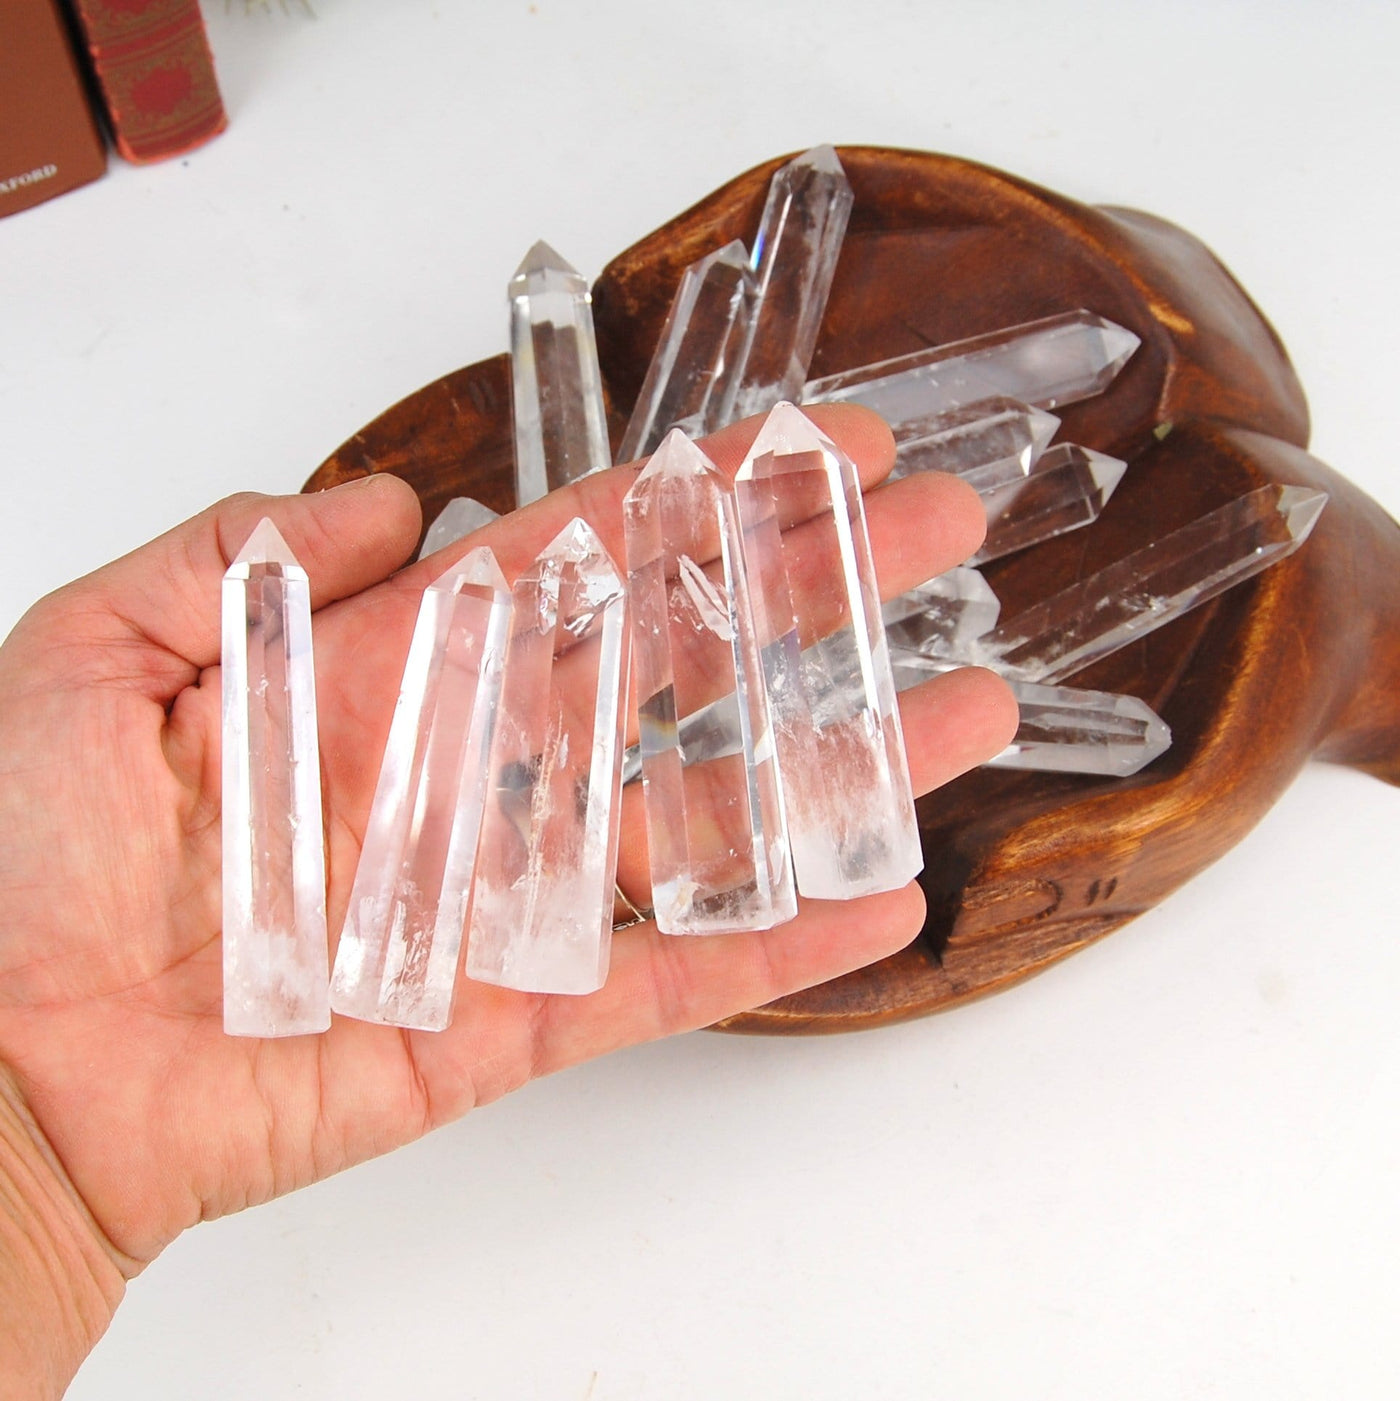 hand holding up 5 Crystal Quartz Obelisks with others in the background